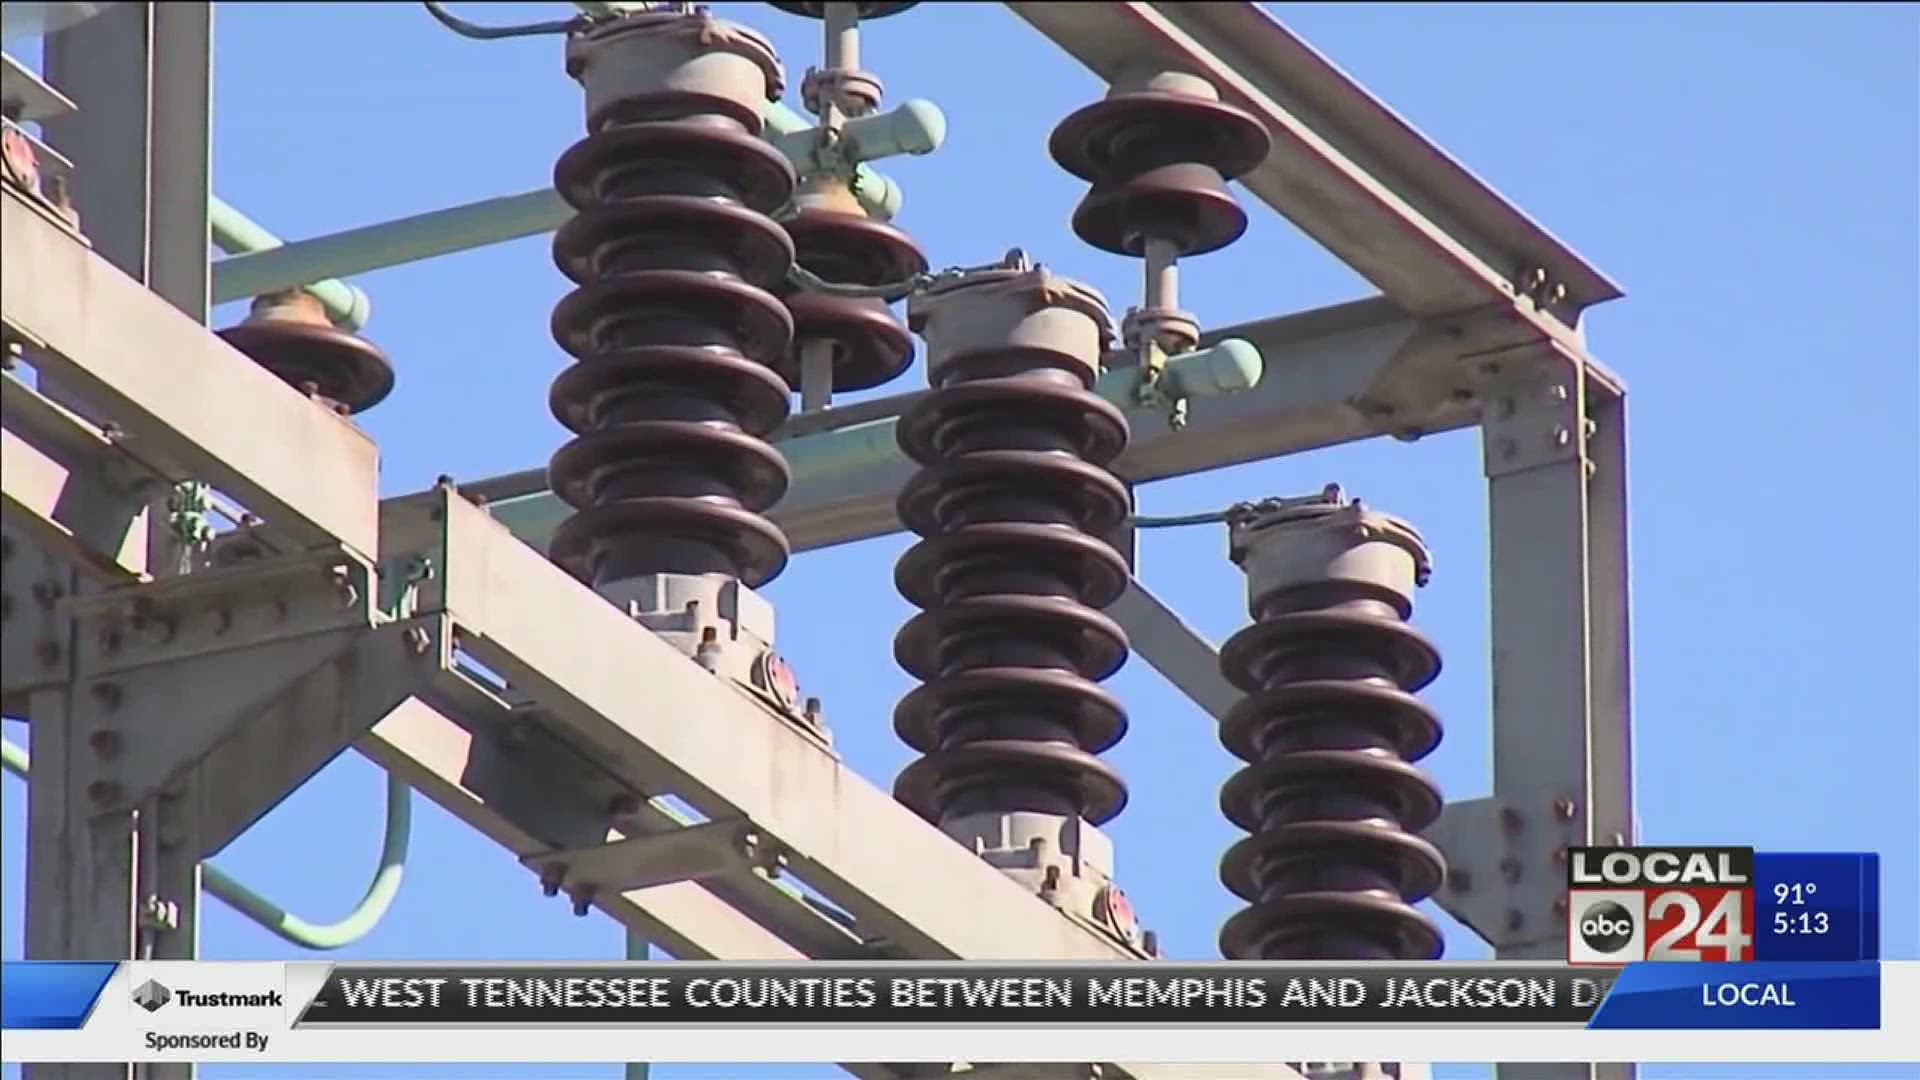 The Memphis Light, Gas, and Water Board will decide on if they will continue to explore the idea of buying electricity elsewhere.